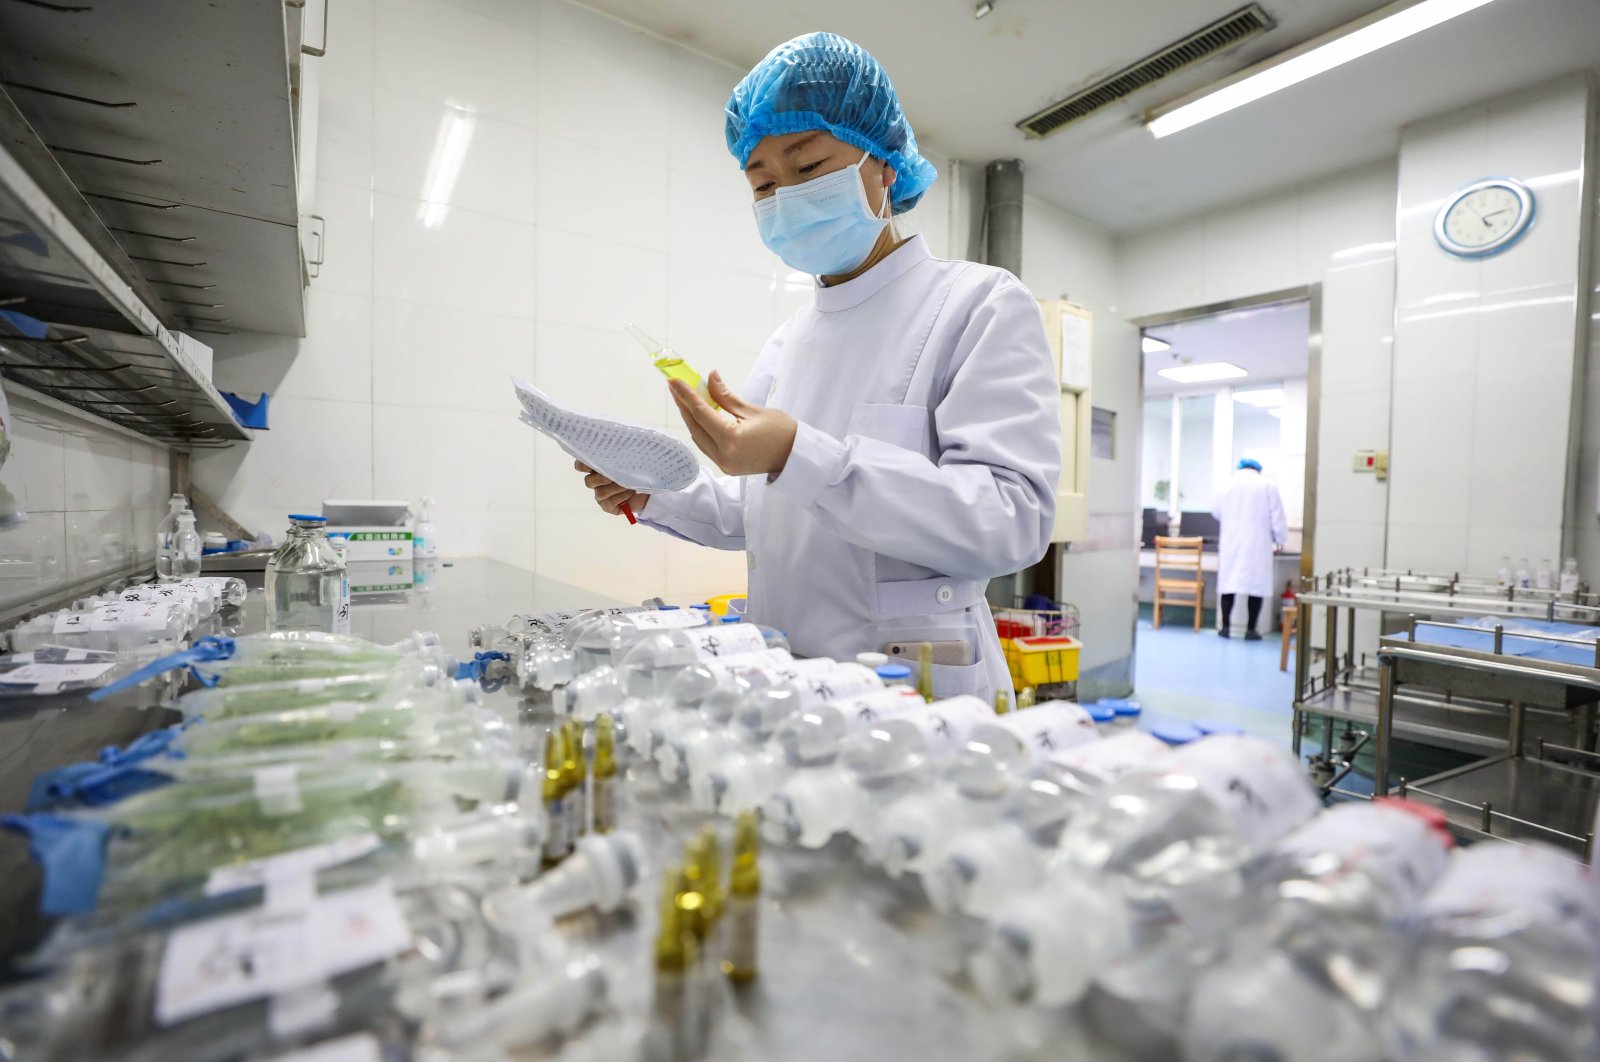 A nurse prepares medicines for patients in Jinyintan Hospital, designated for COVID-19 patients, in Wuhan, central China, Feb. 16, 2020. (Getty Images)